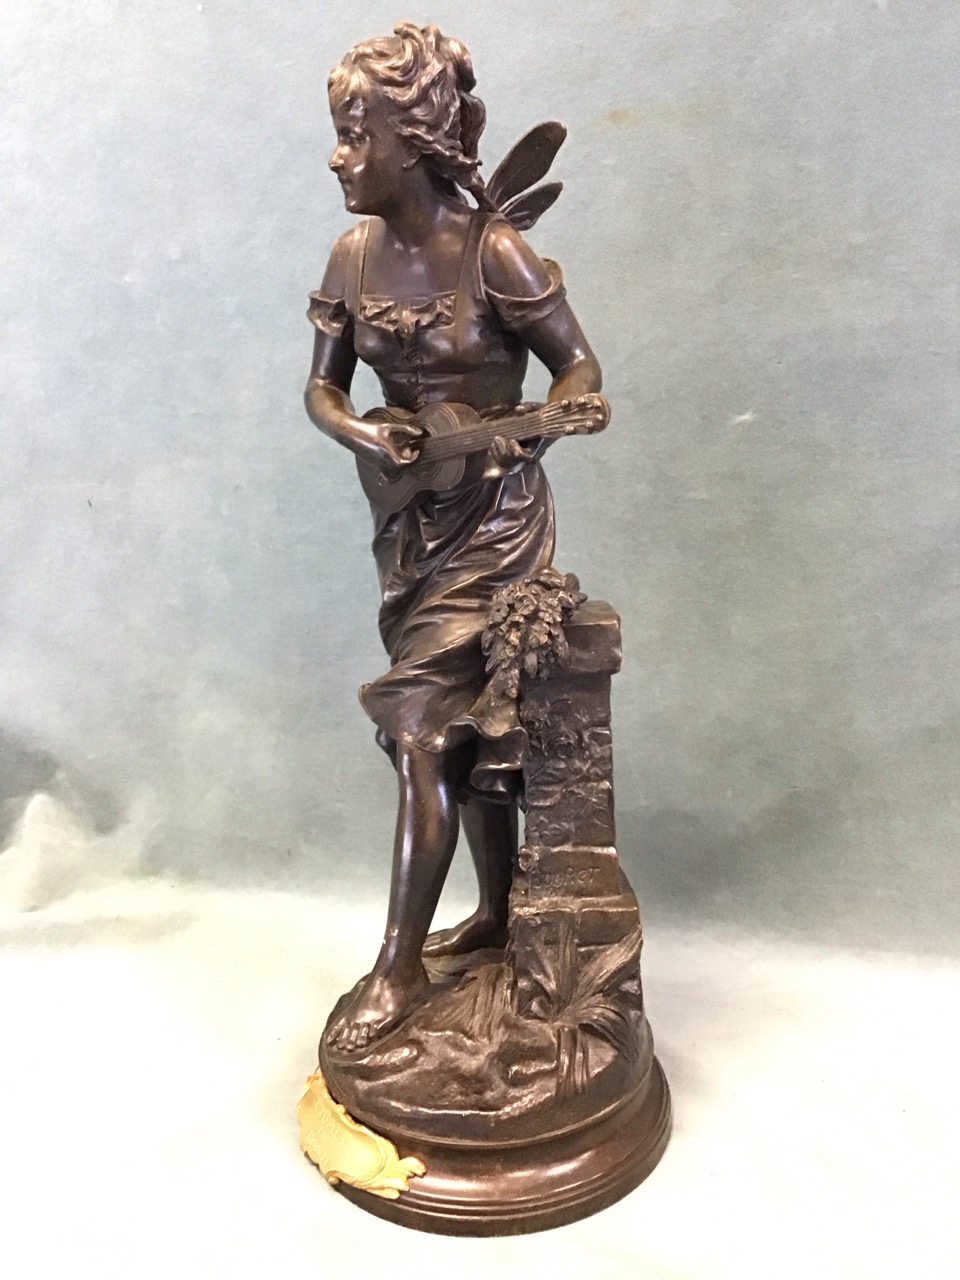 Eutrope Bouret, a C19th French patinated bronze figure of a winged fairy beside a plinth - Image 3 of 3